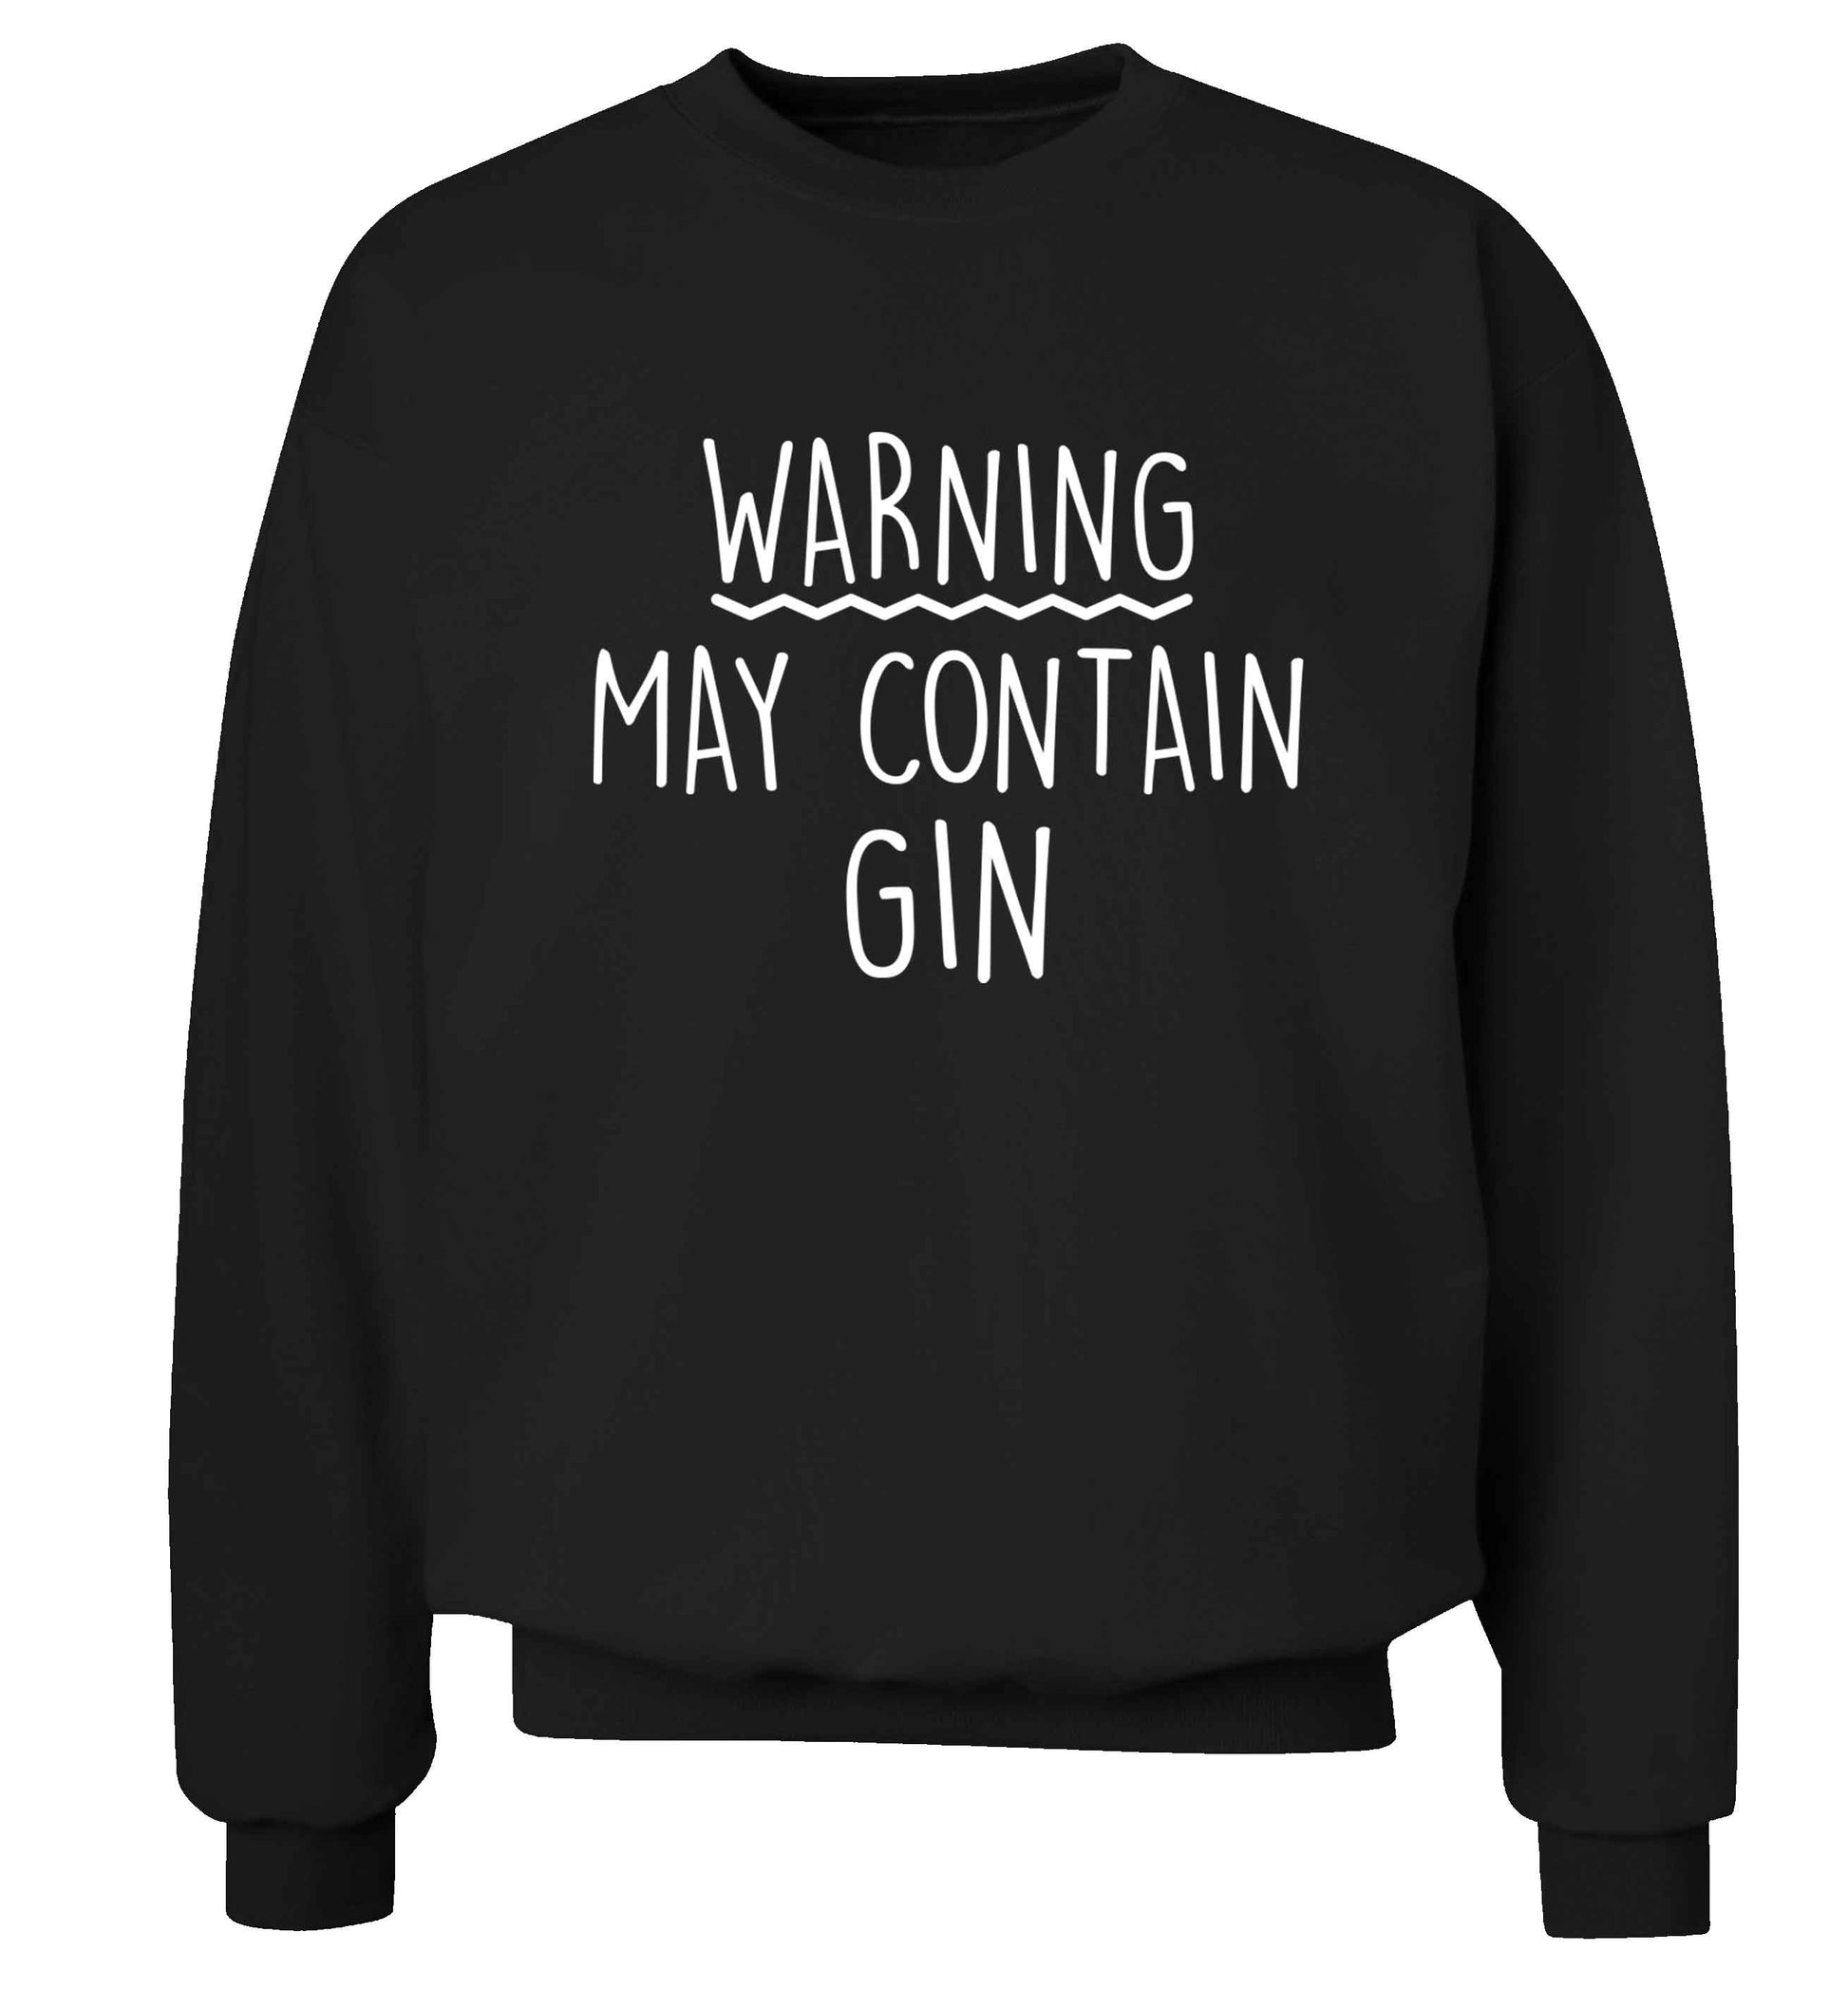 Warning may contain gin Adult's unisex black Sweater 2XL